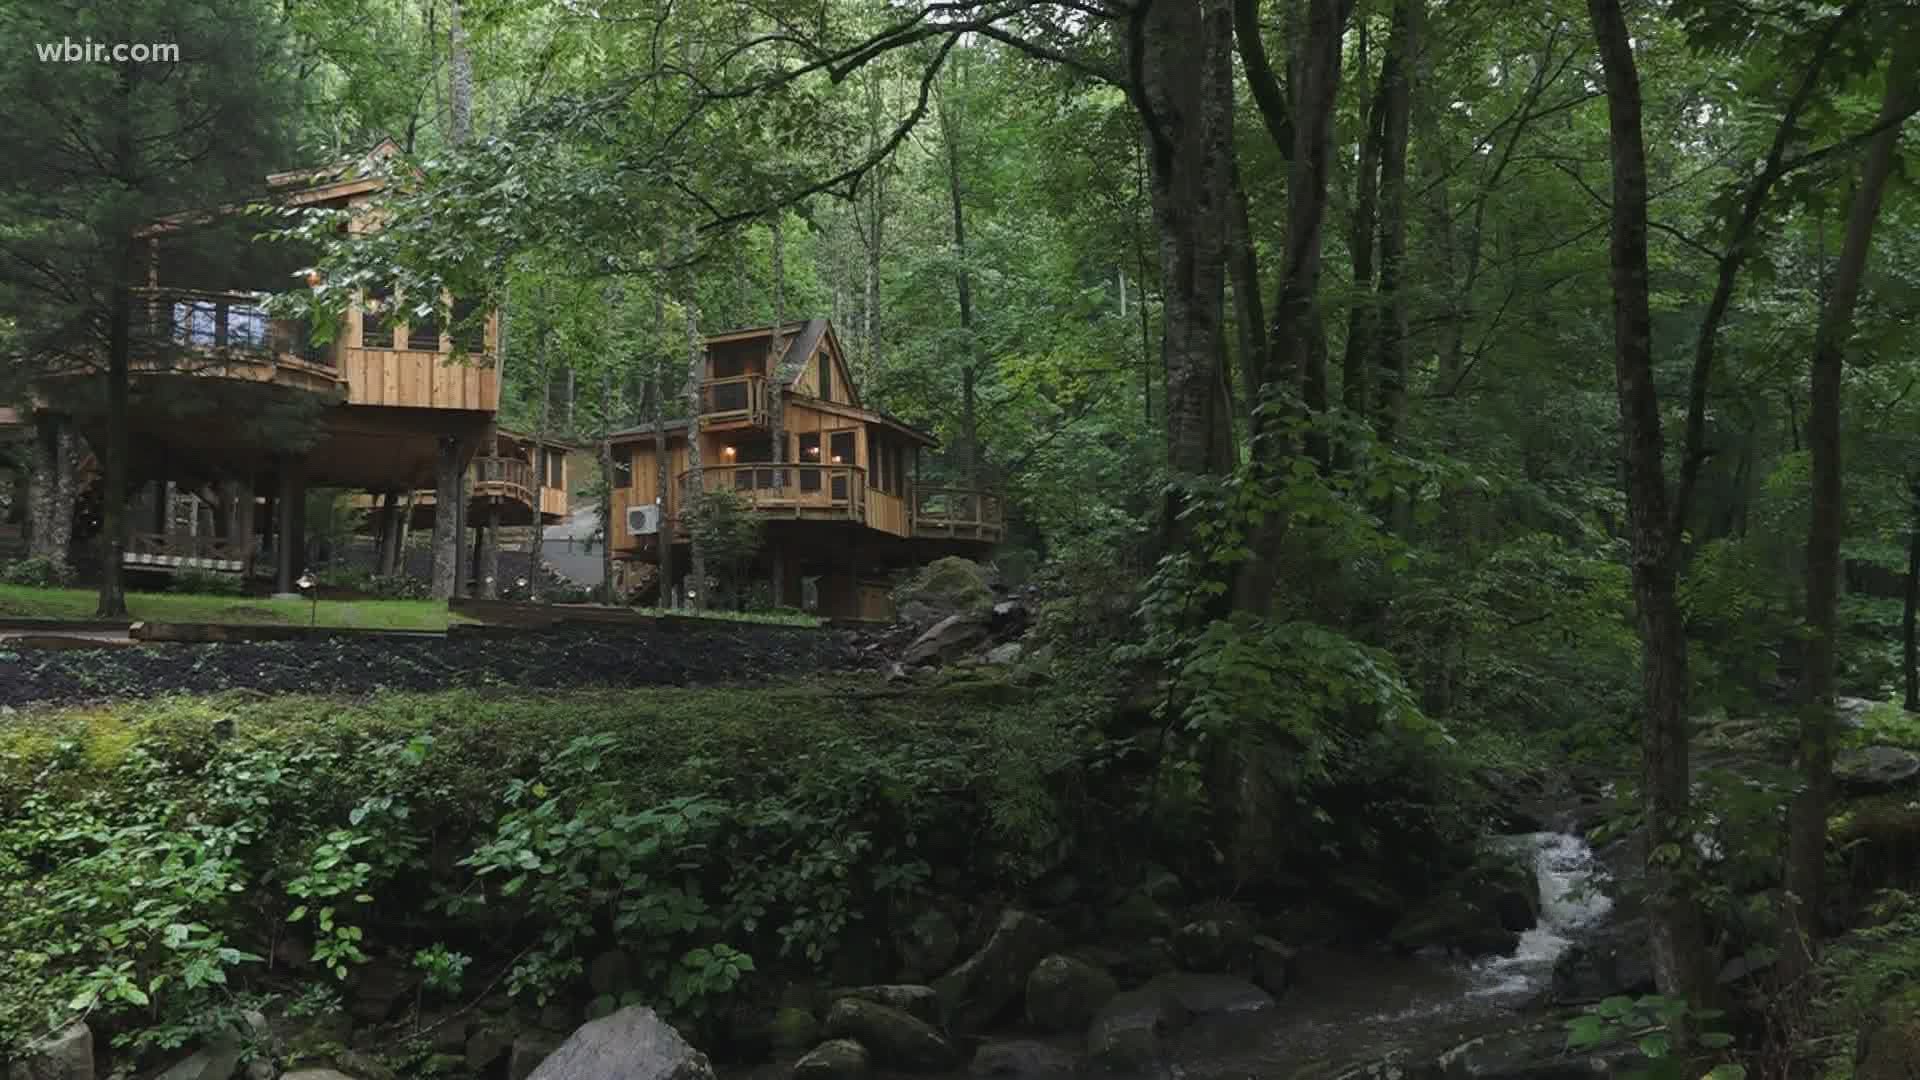 There's a new luxury treehouse resort near Gatlinburg that opened this past spring. The owners say they've been booked with guests looking for vacations.